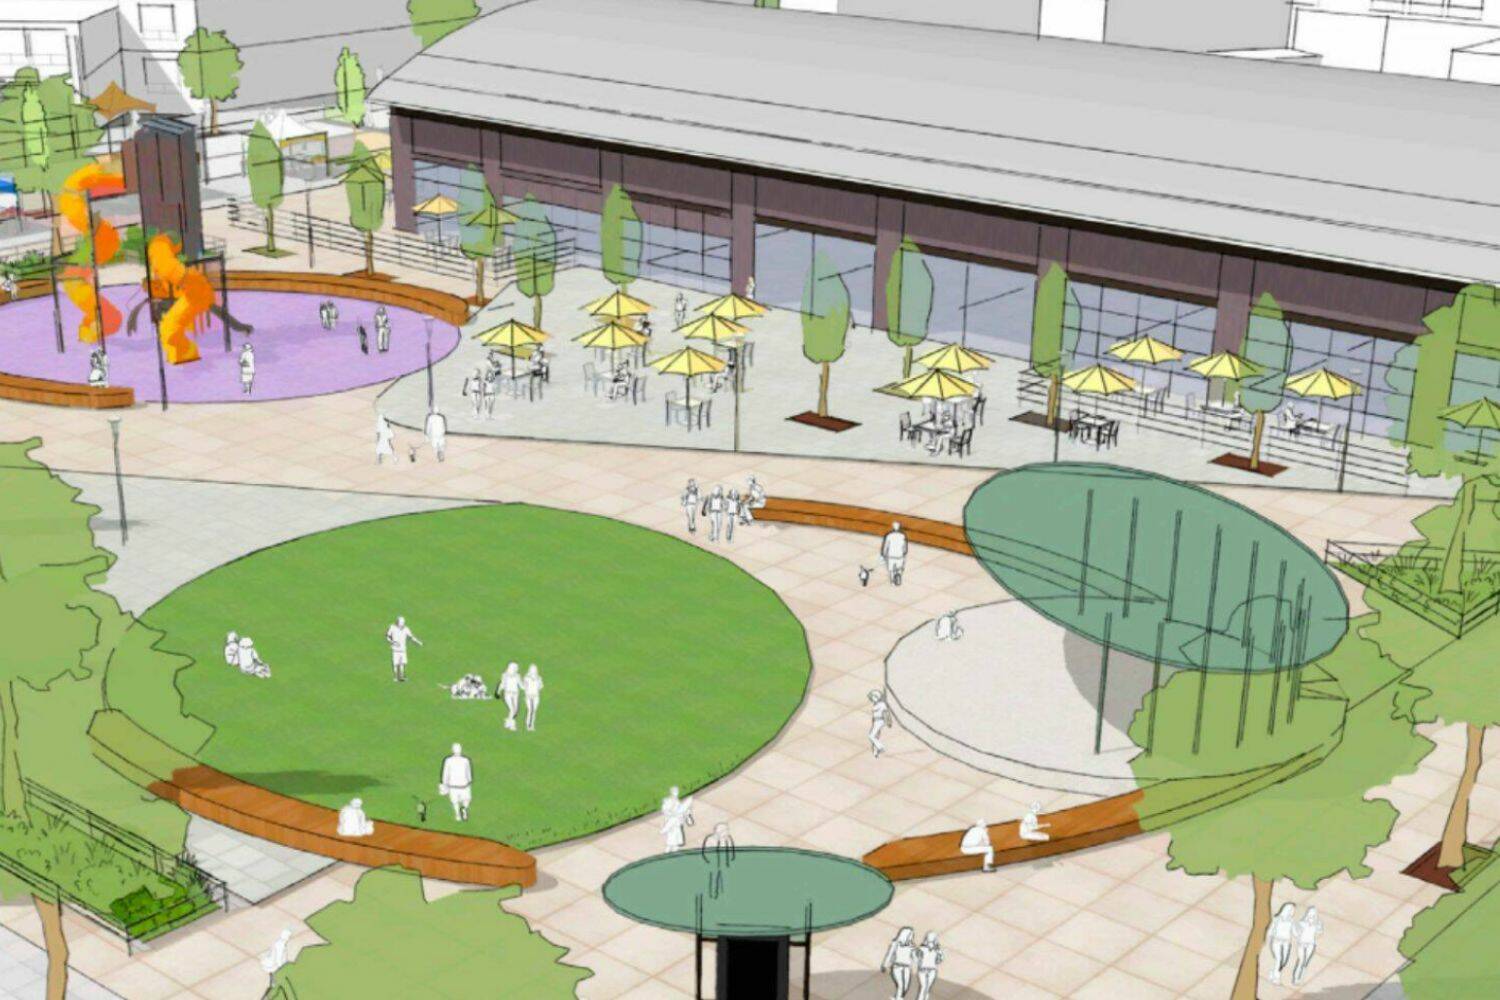 City of Renton
Screenshot from a report in the 2023-2025 Capital Budget Request Design rendering of the public square surrounding the renovated Pavilion Building.